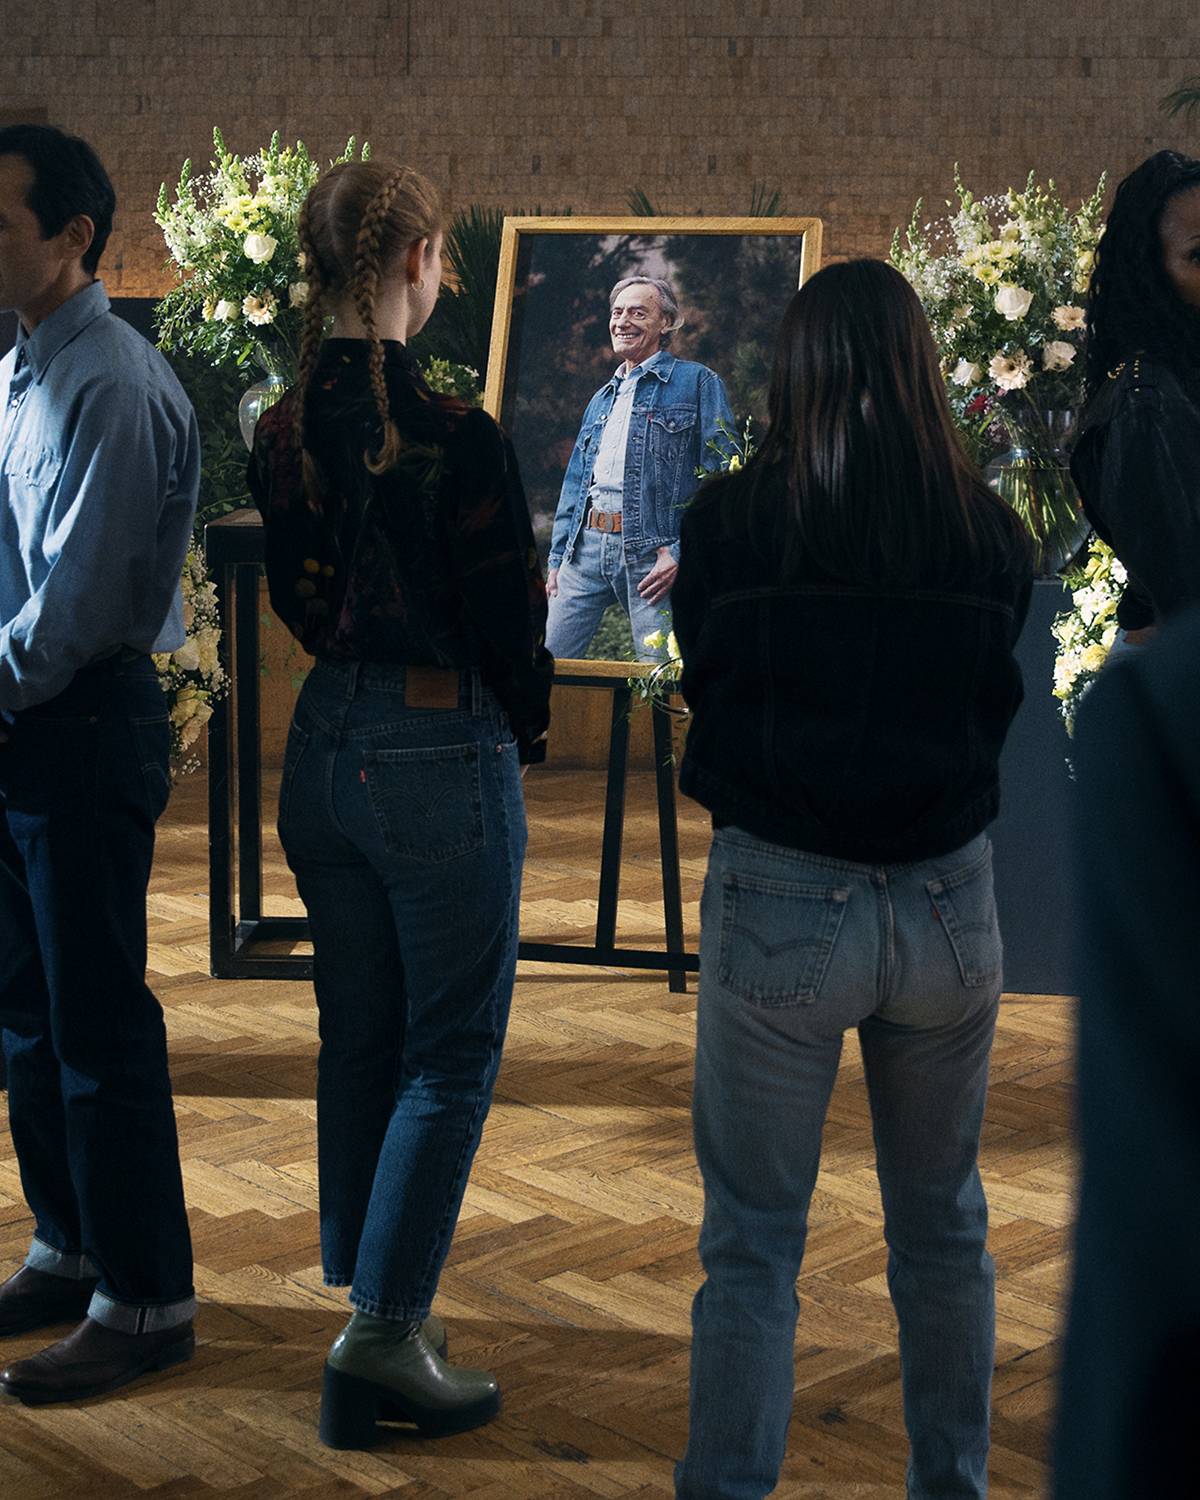 People wearing Levi's jeans at a funeral looking at a picture of the person who passed who is wearing Levi's jeans and a Trucker Jacket.